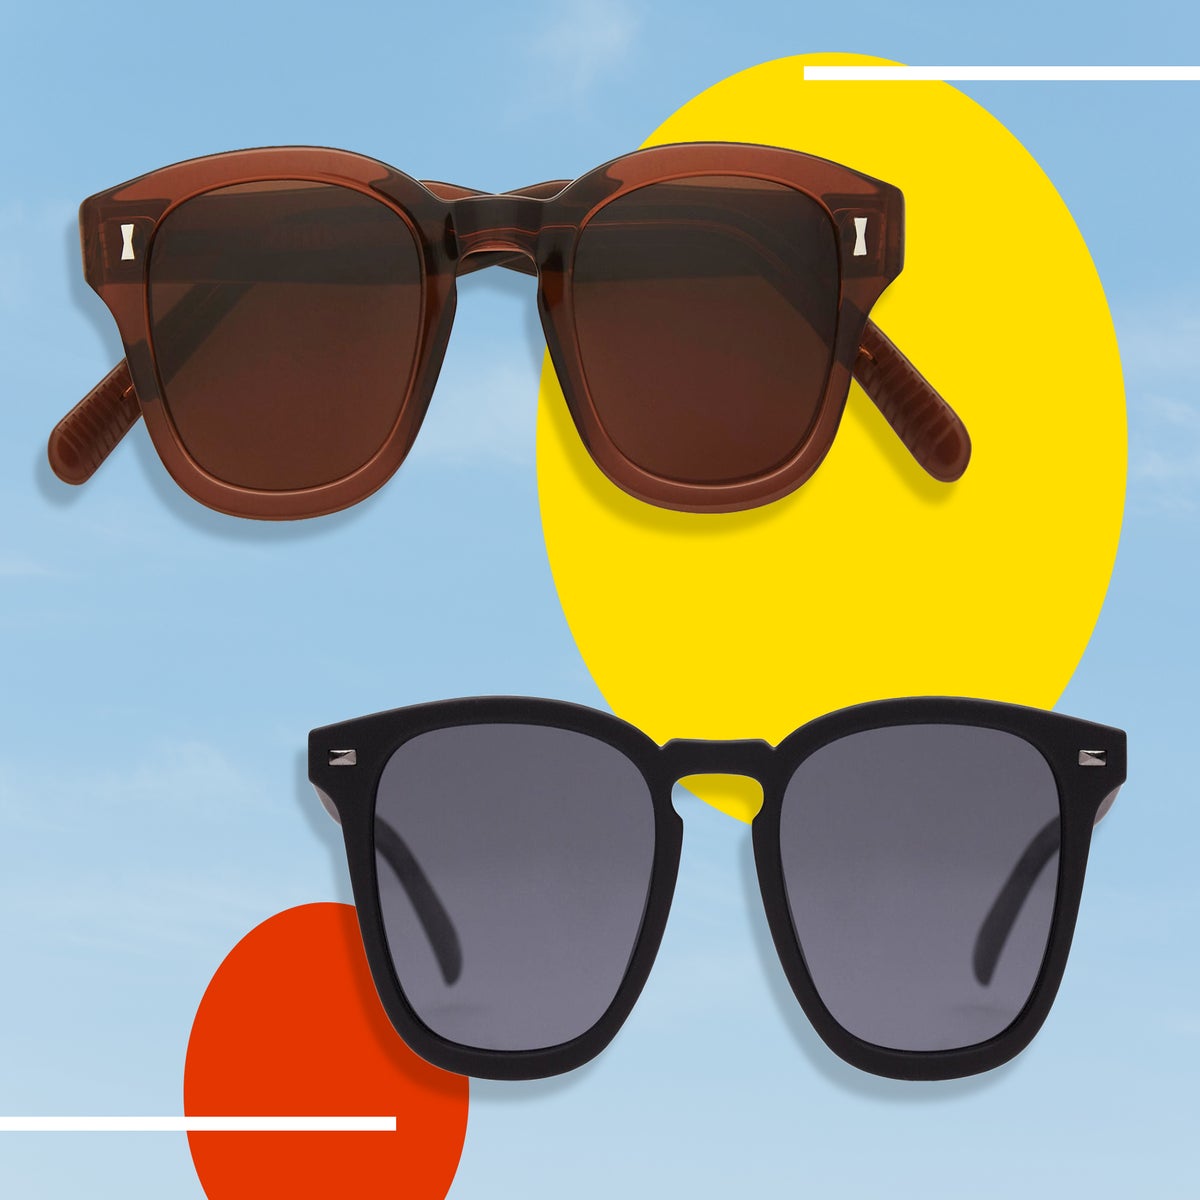 Best men's sunglasses for summer 2022 – from Ray-Ban, M&S and more